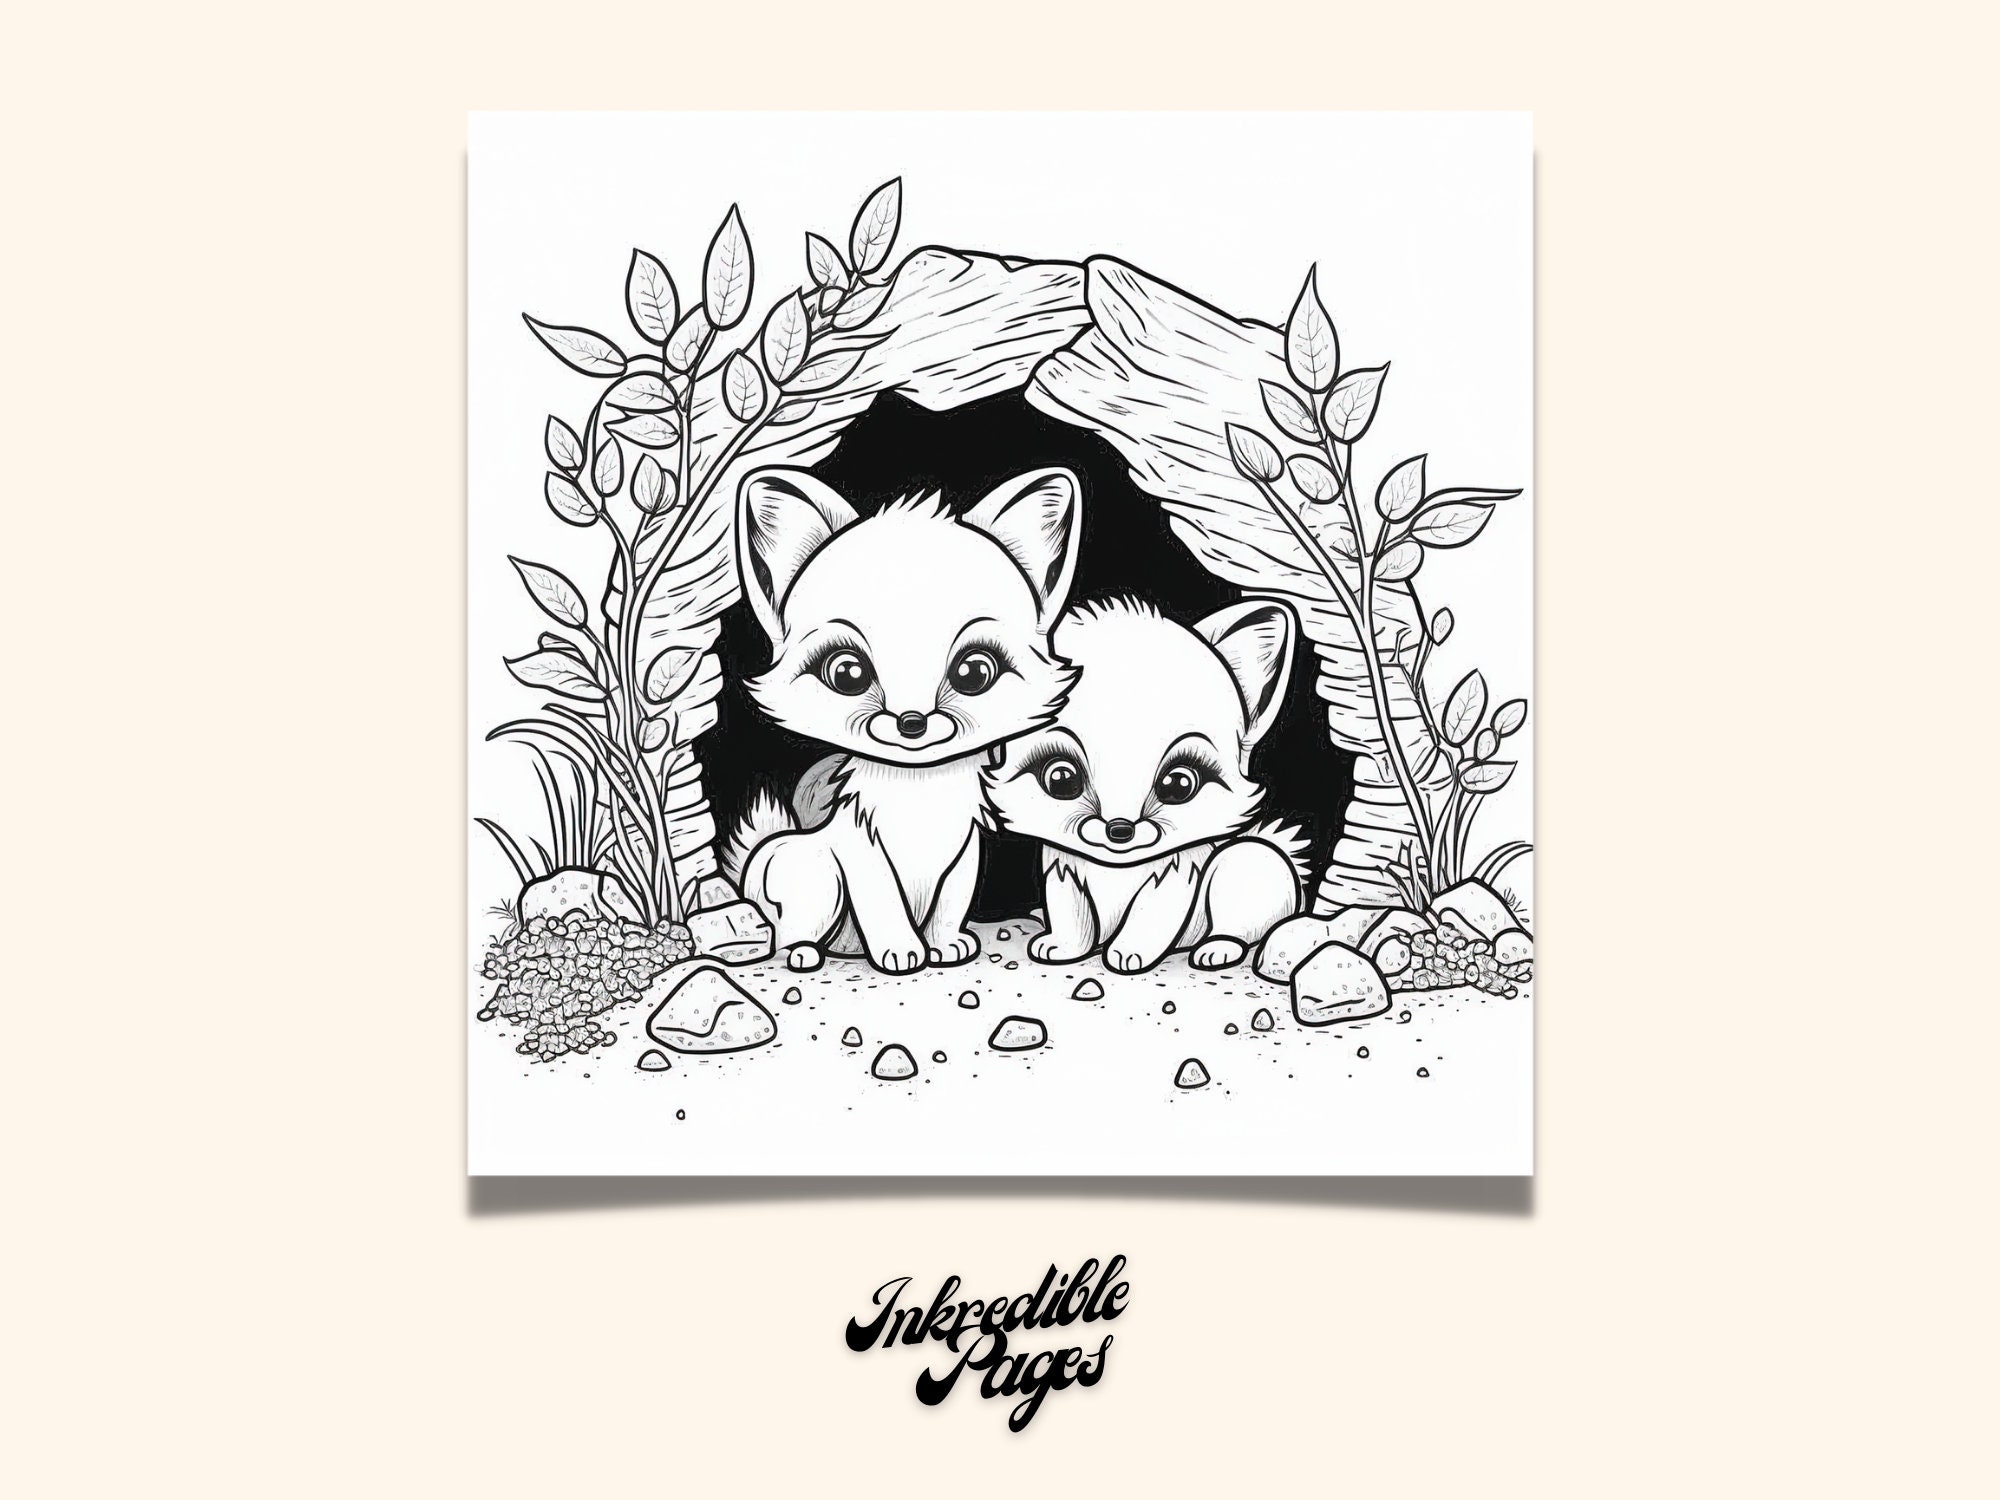 Coloring Pages for Adults Cute Kawaii Baby Animals to Color Adult Coloring  Books Printable Relaxing Gift Idea Digital Download Illustration 